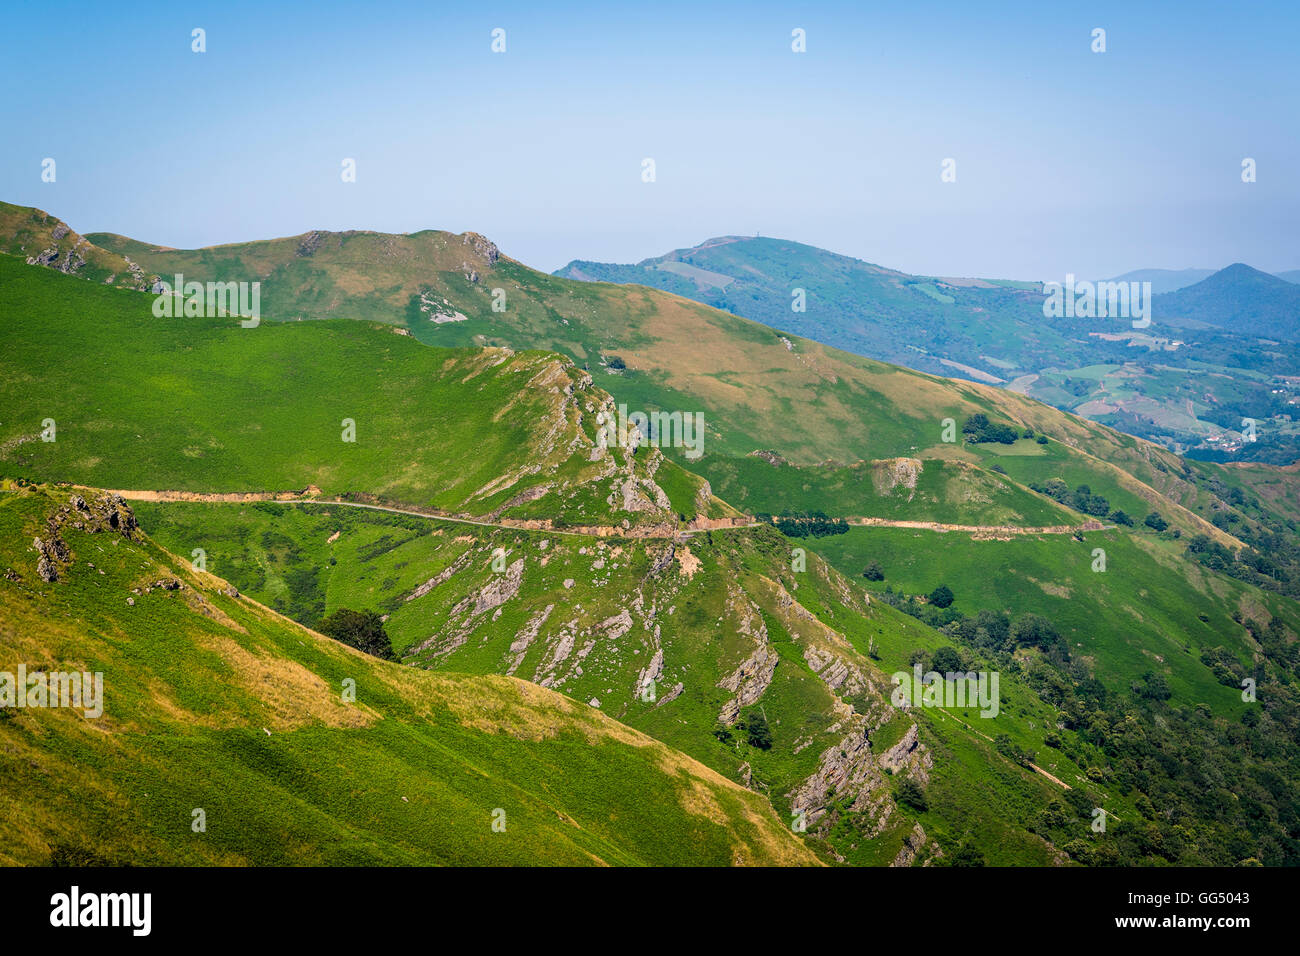 Garazi Baigorri valley, Inter-communality on the border between Basque Country in Spain and France Stock Photo